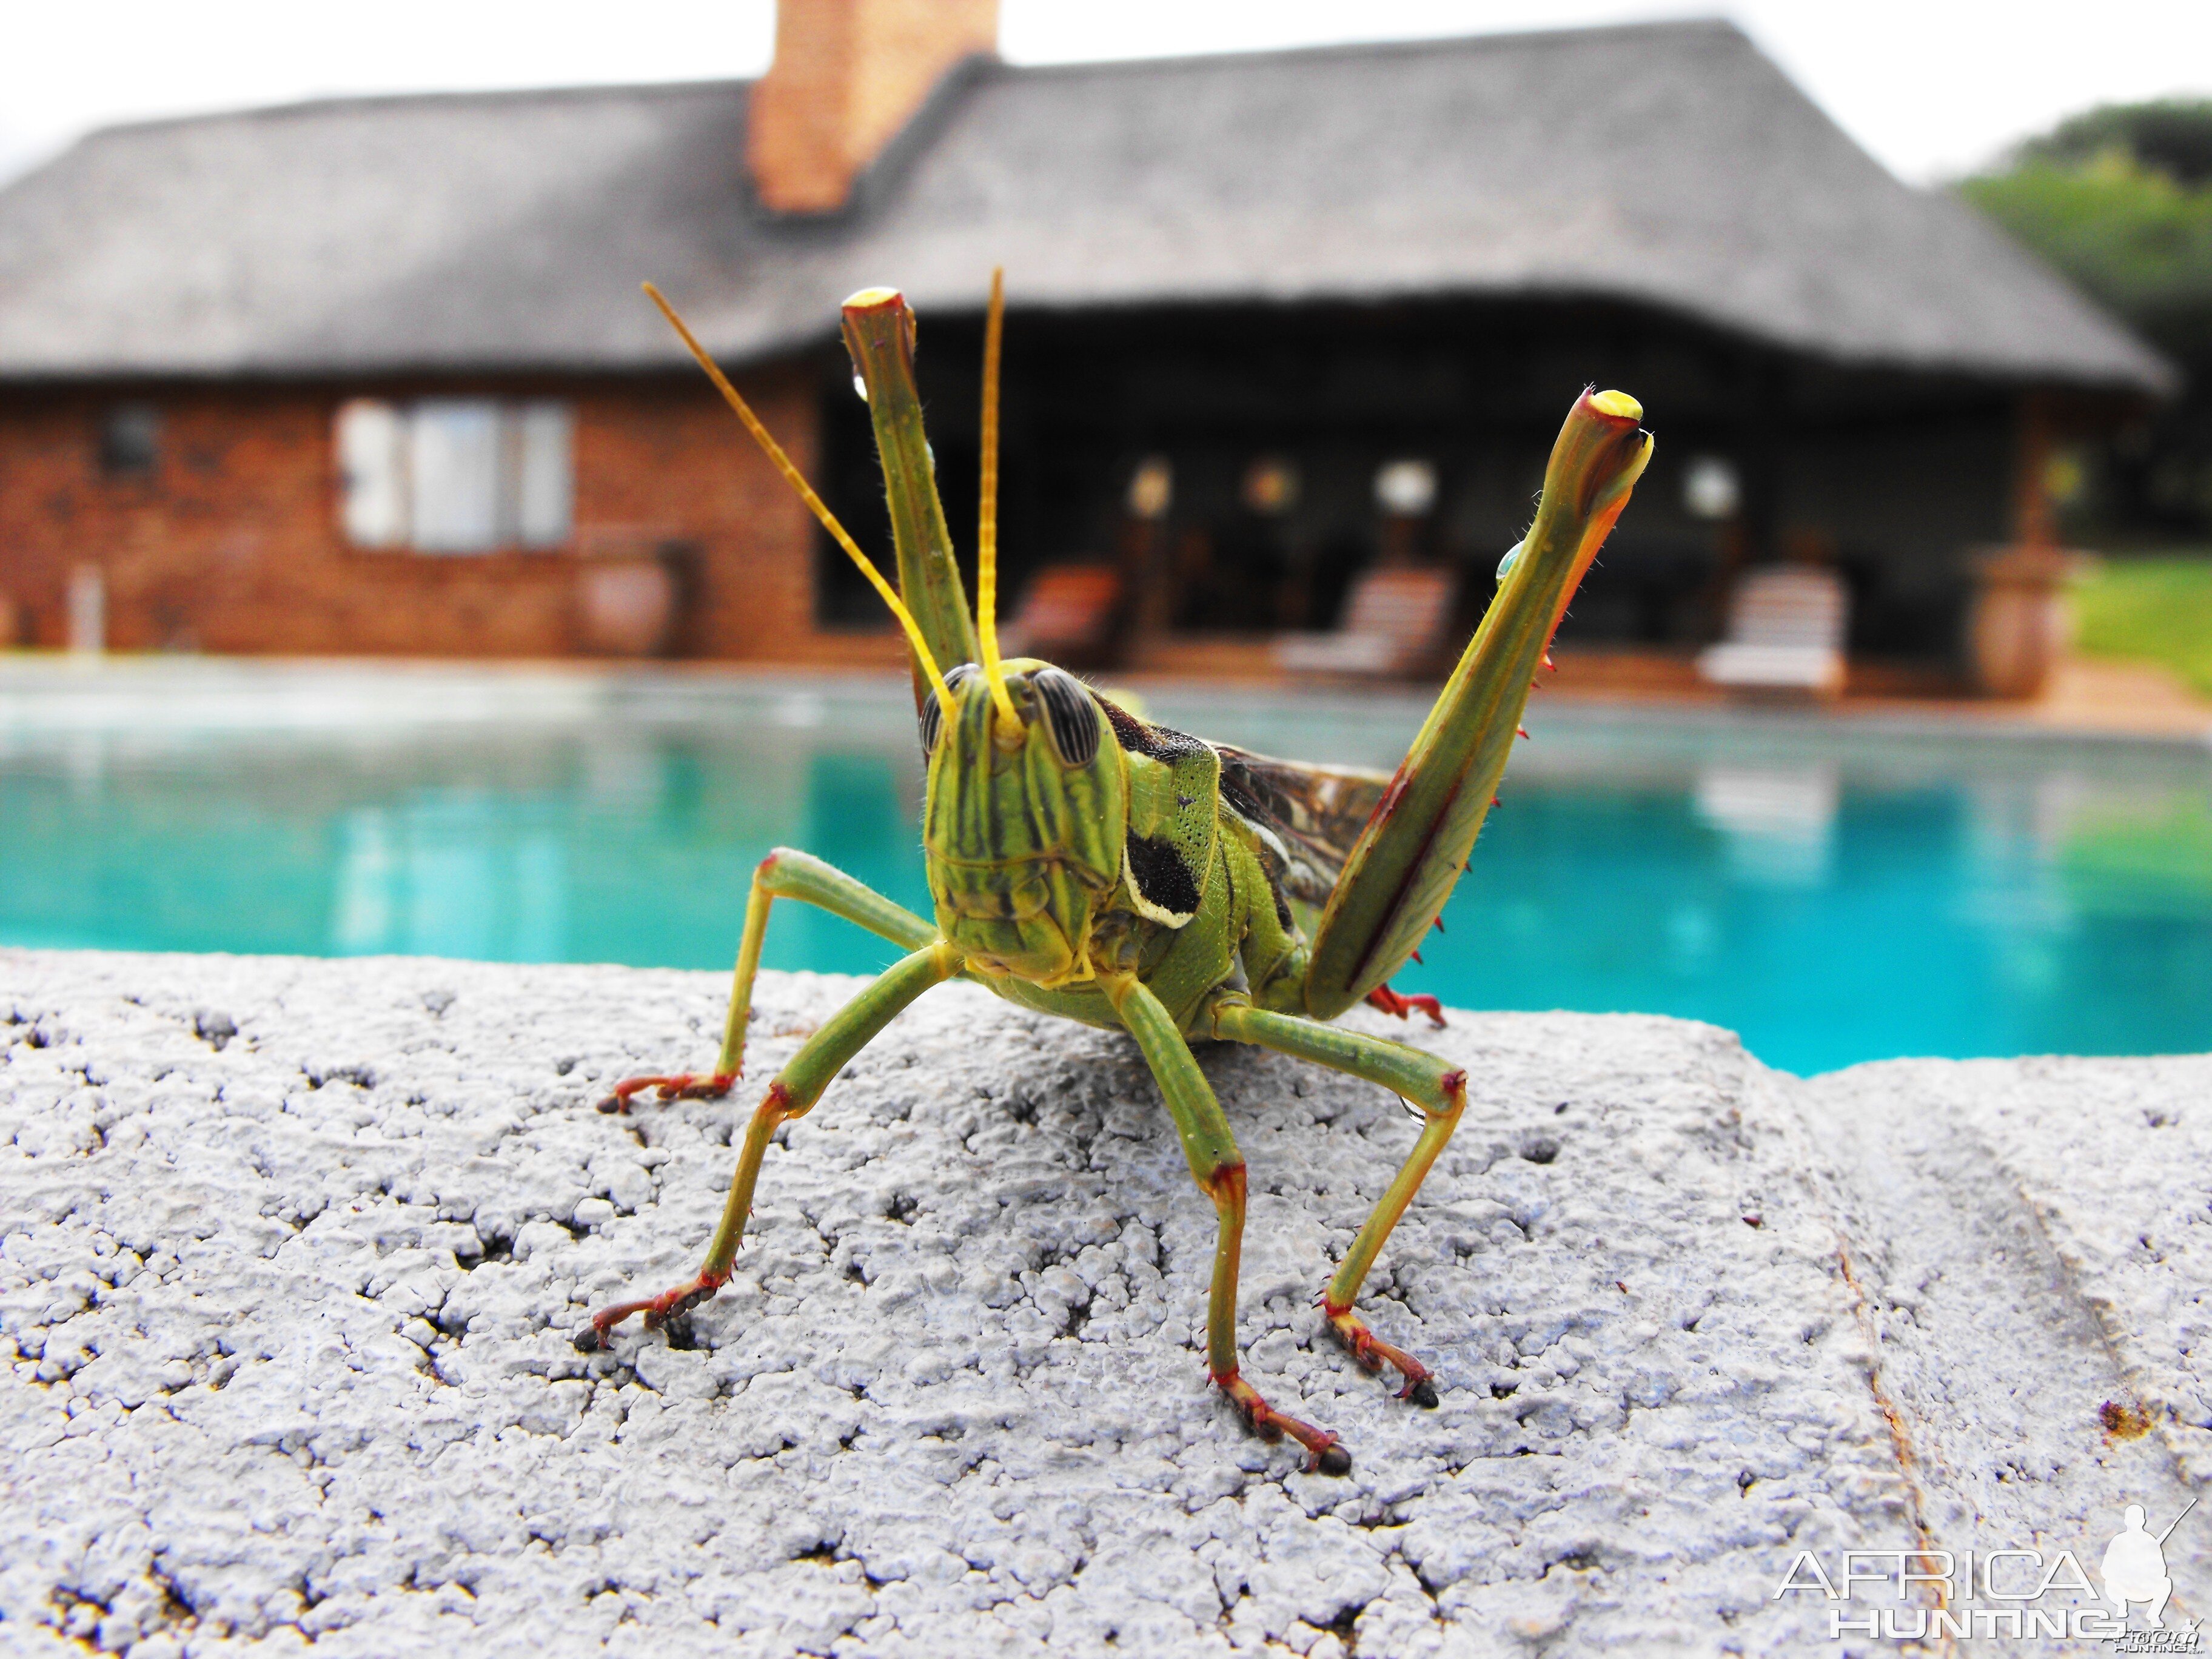 Monster grasshopper by the pool